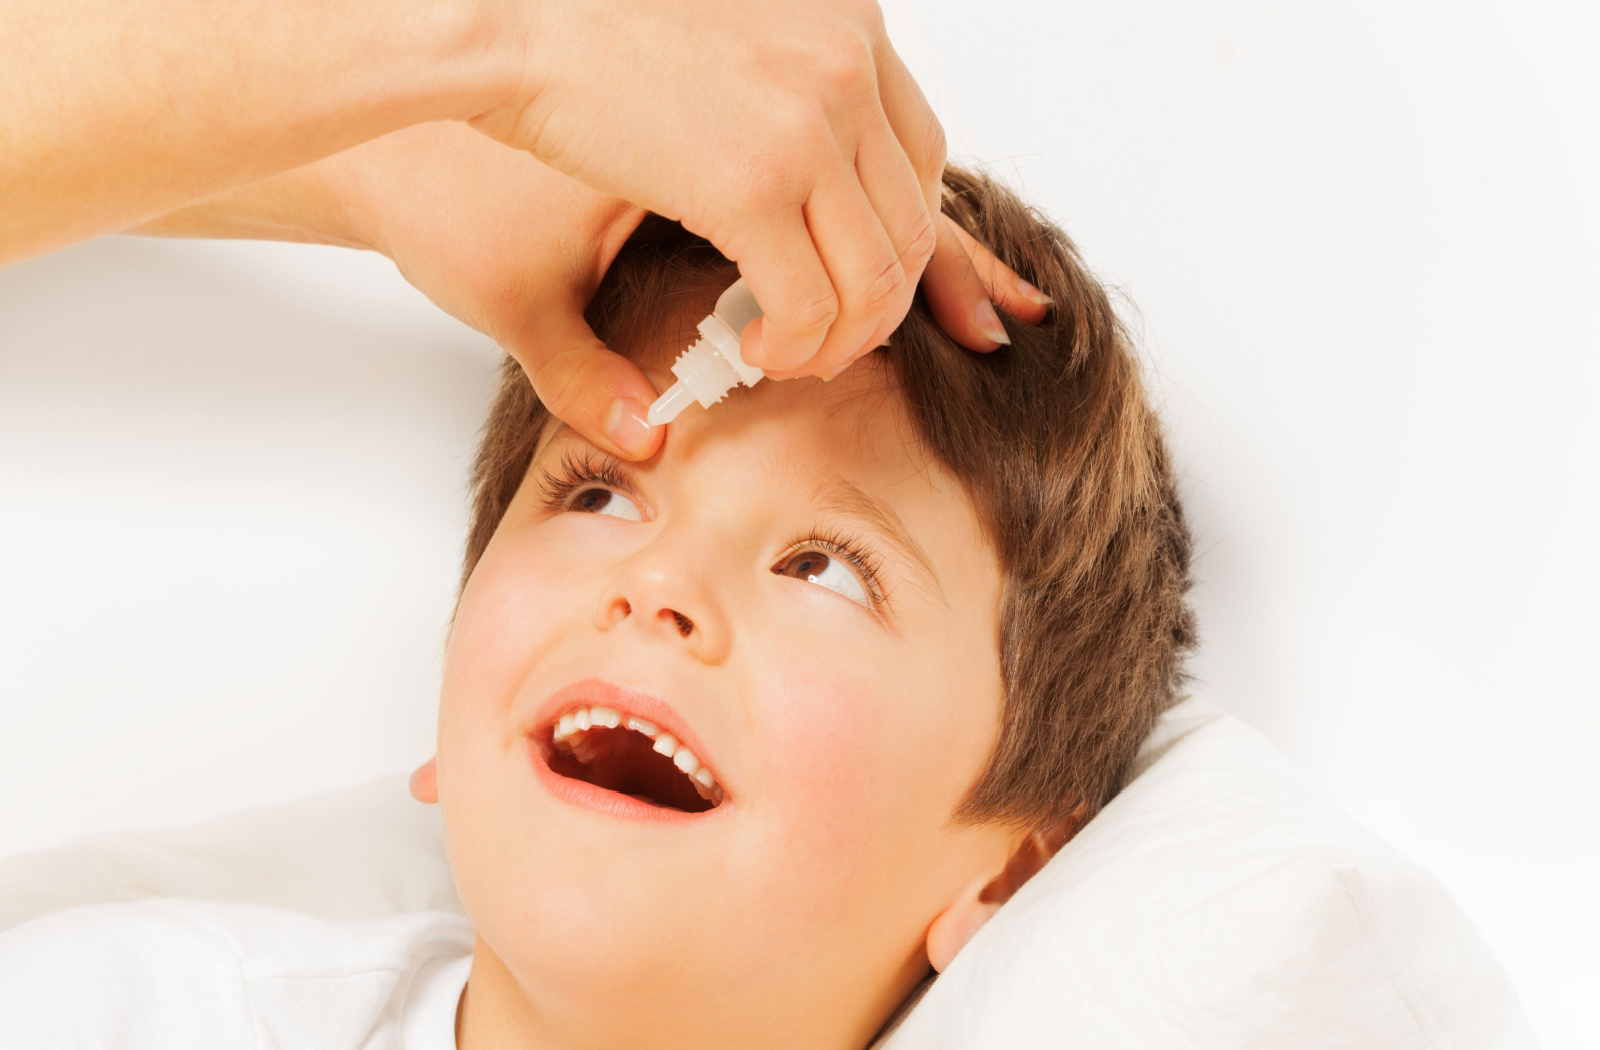 A woman puts atropine eye drops into the right eye of a young happy boy.